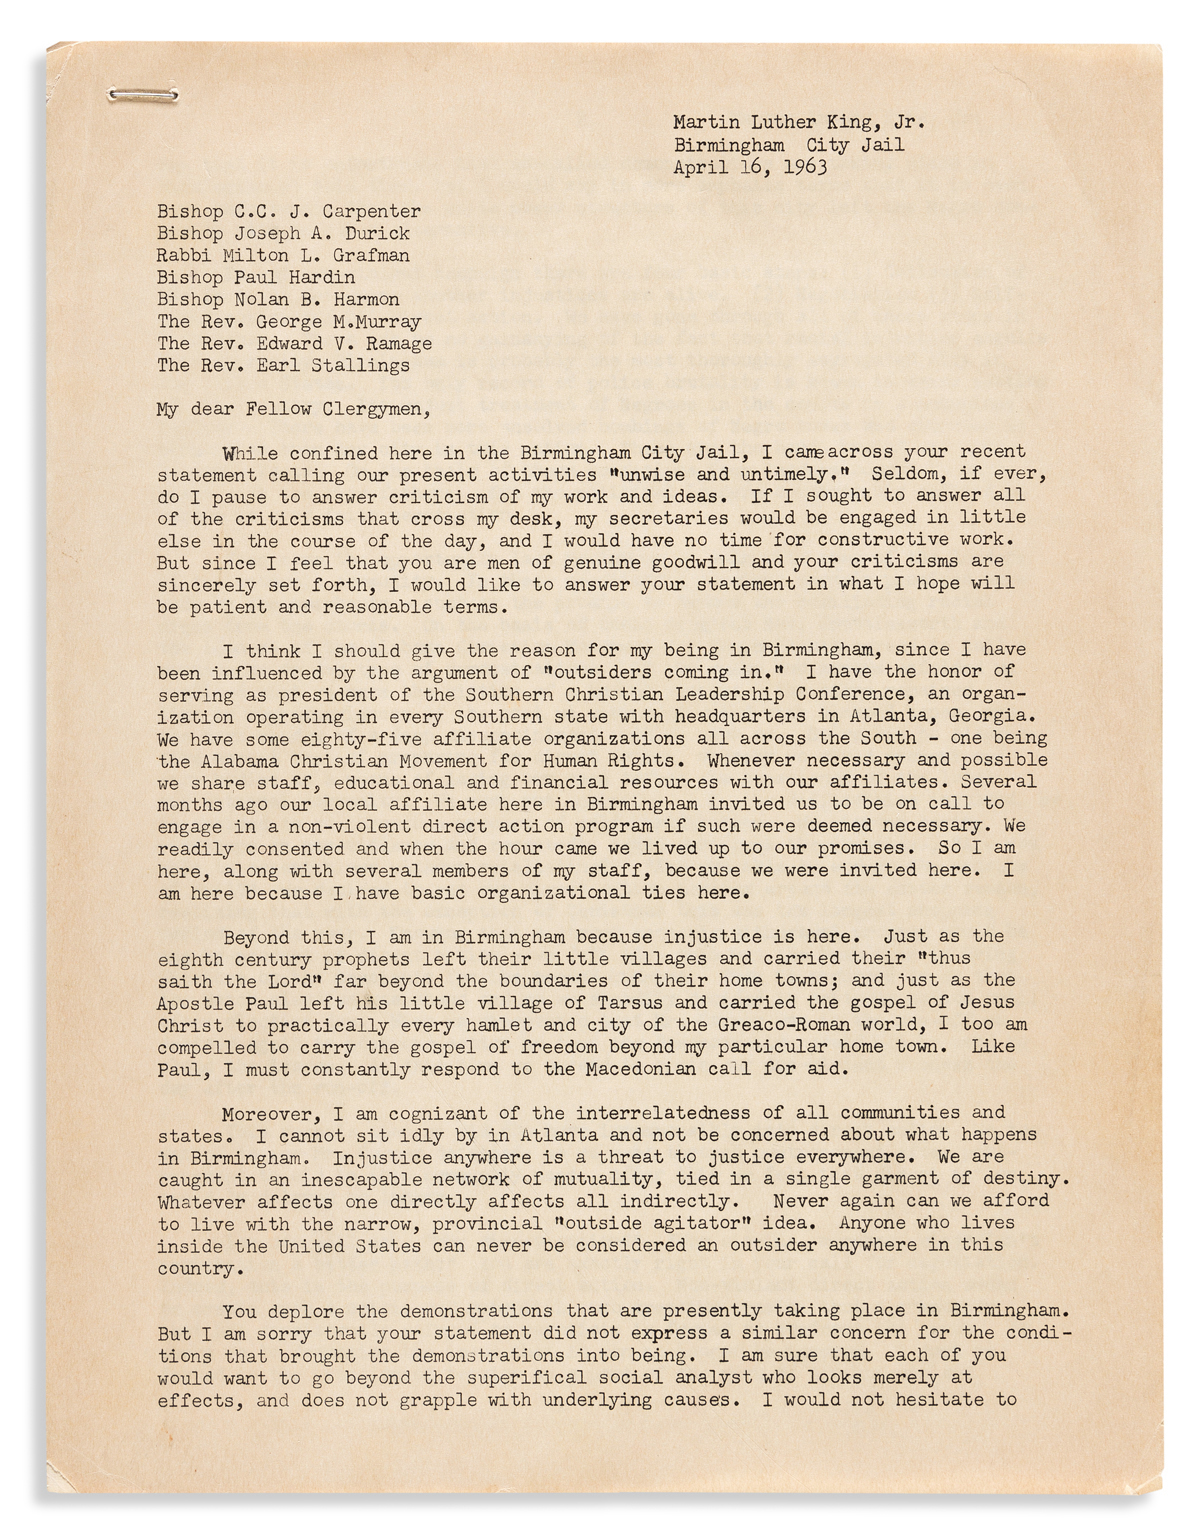 1963 Martin Luther King's Letter from Birmingham Jail is published